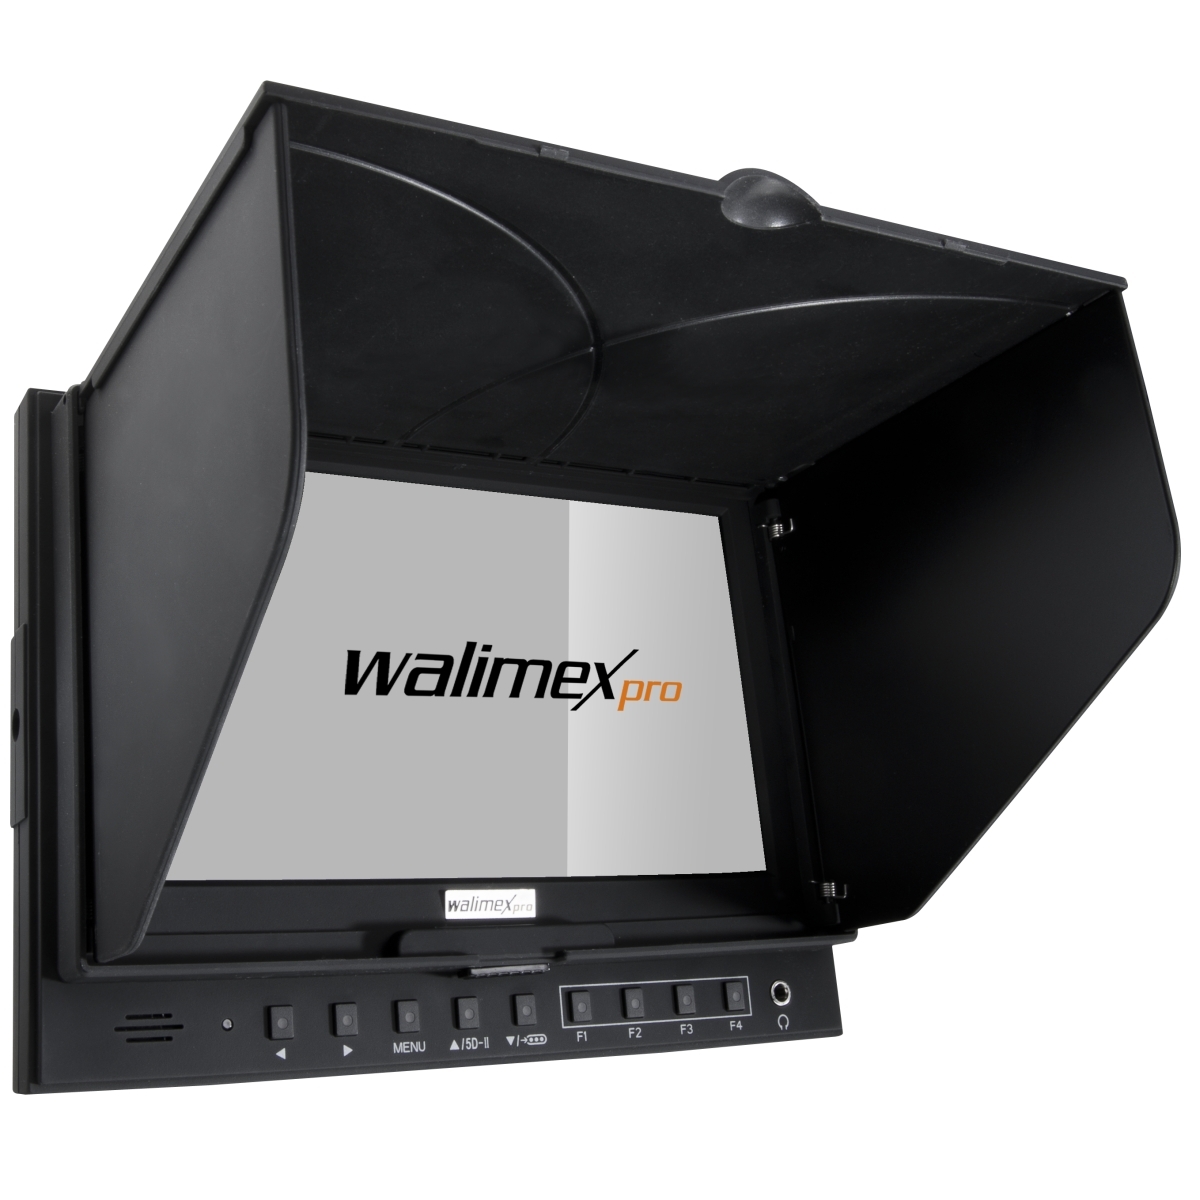 Walimex pro LCD Monitor Director 7 Zoll, 17,8 cm